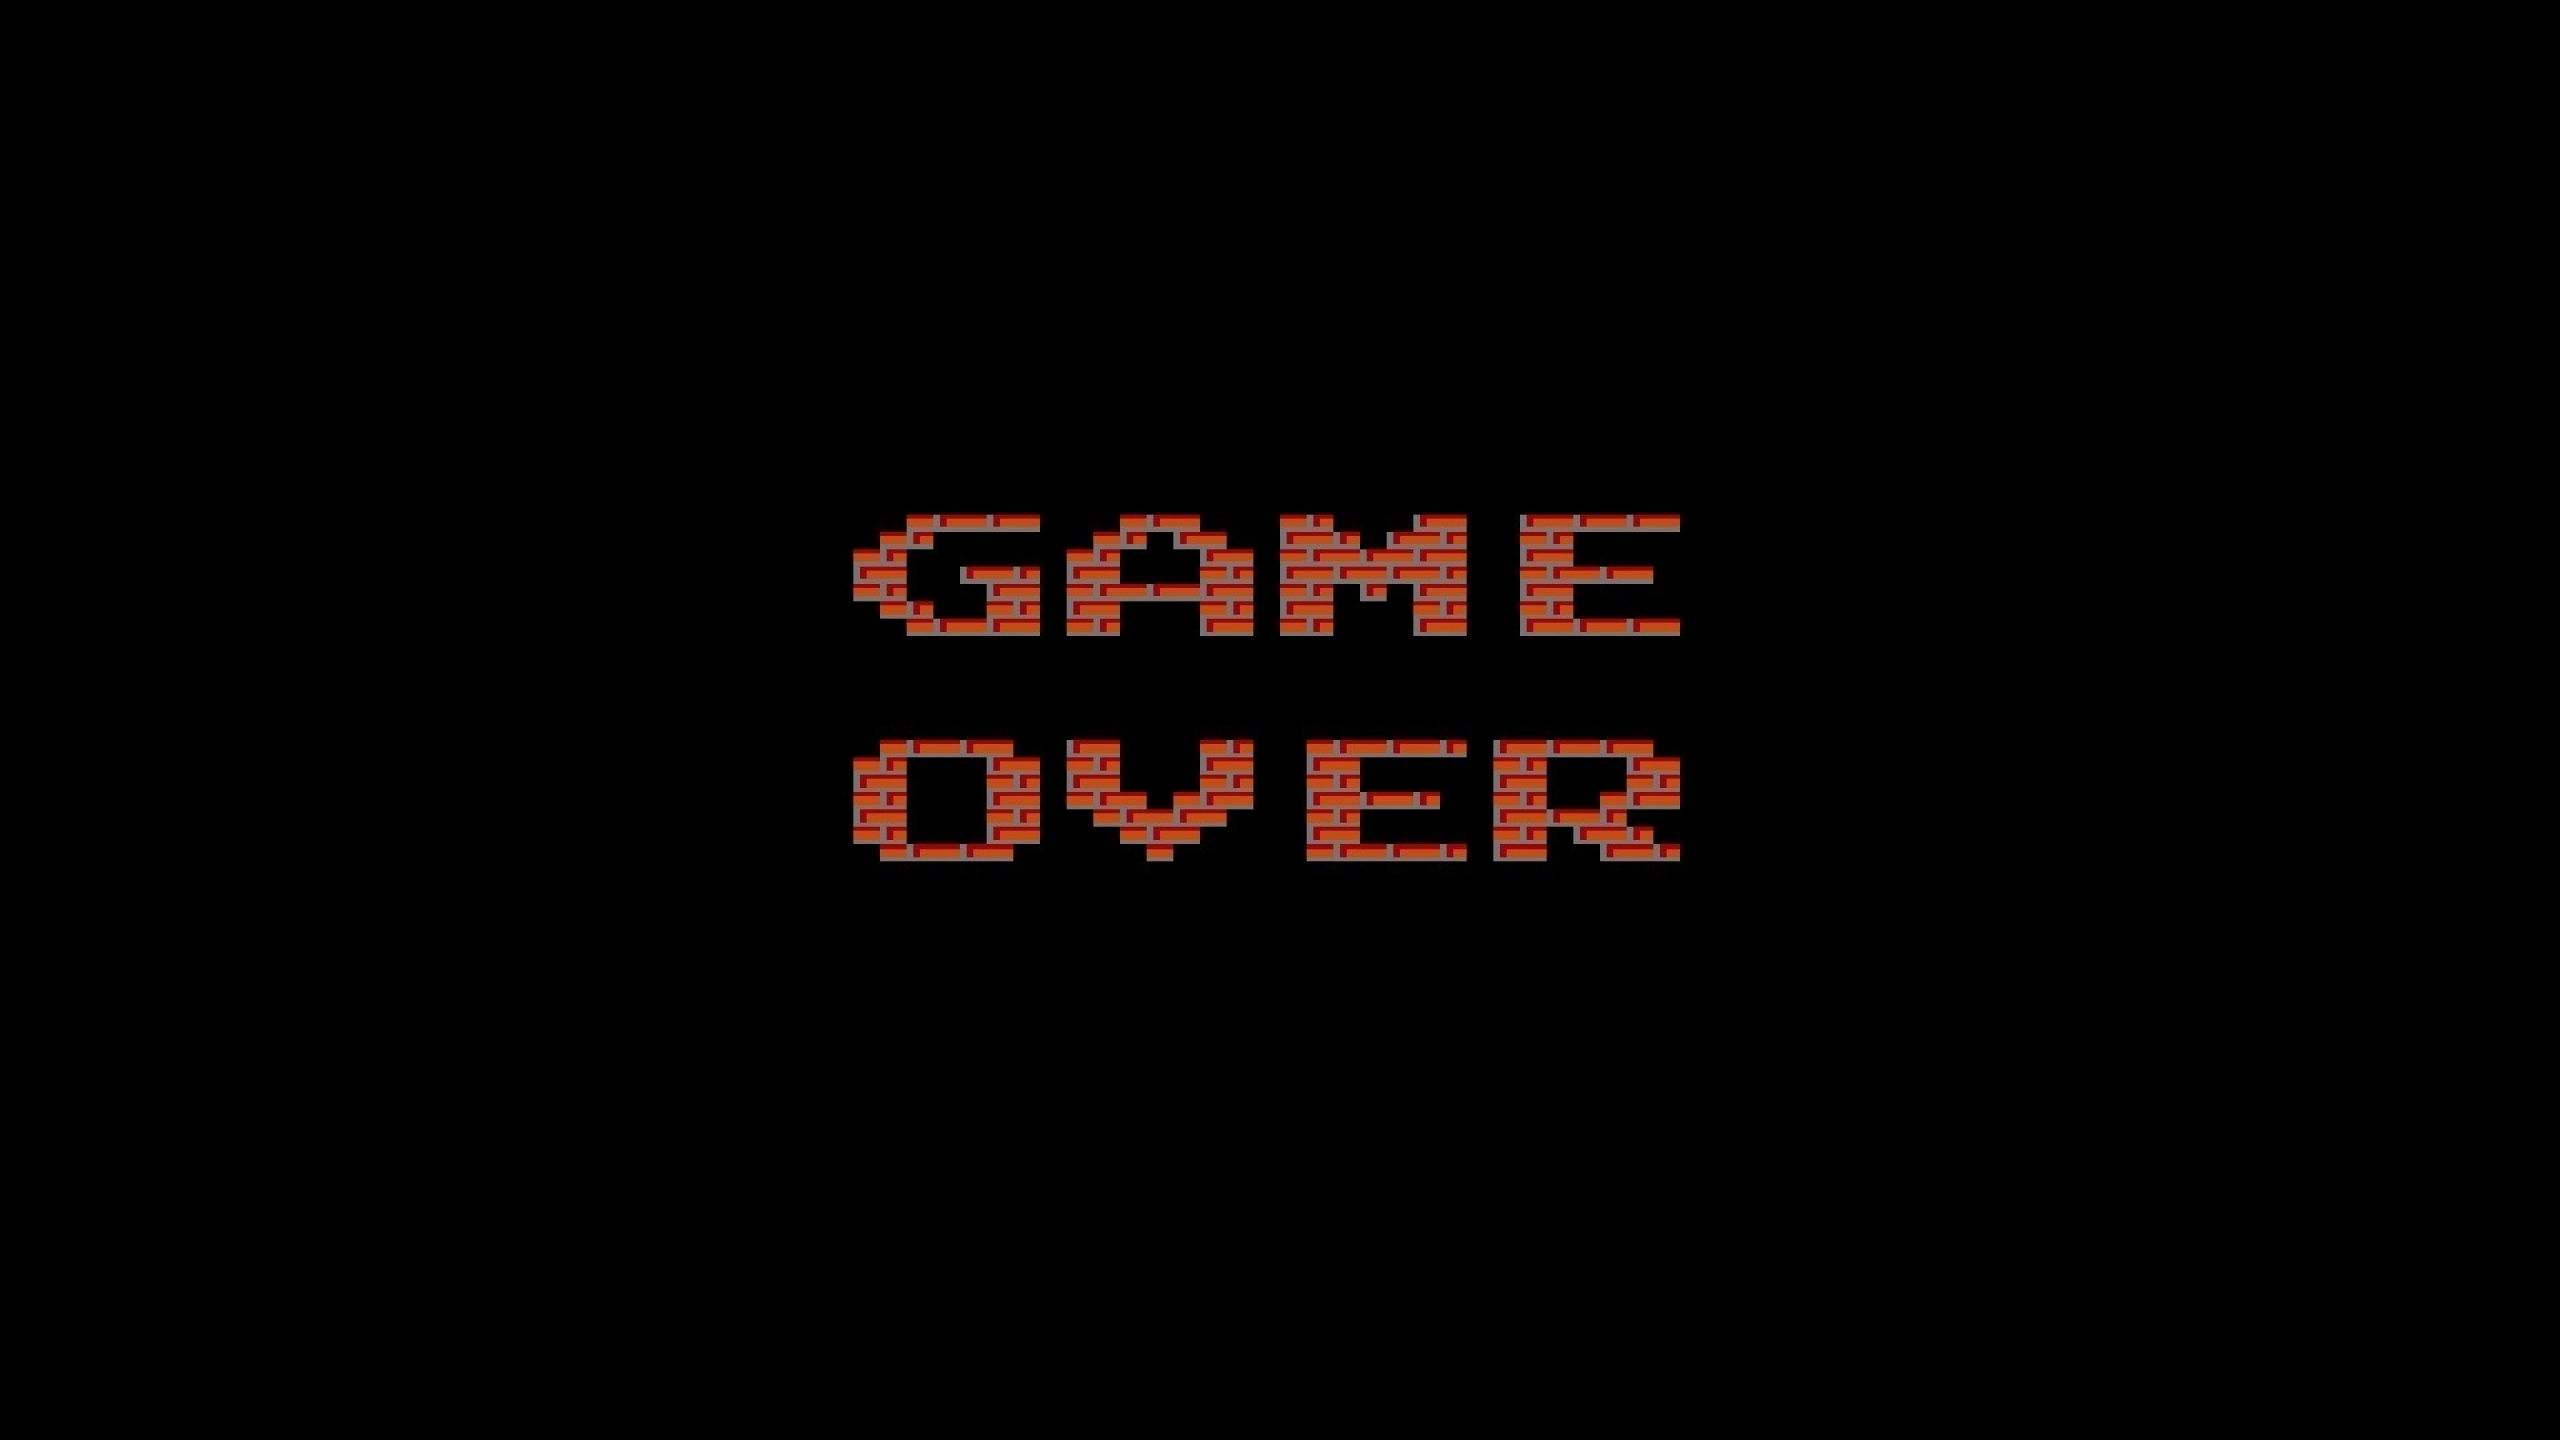 Games Text Typography Game Over Wallpaper